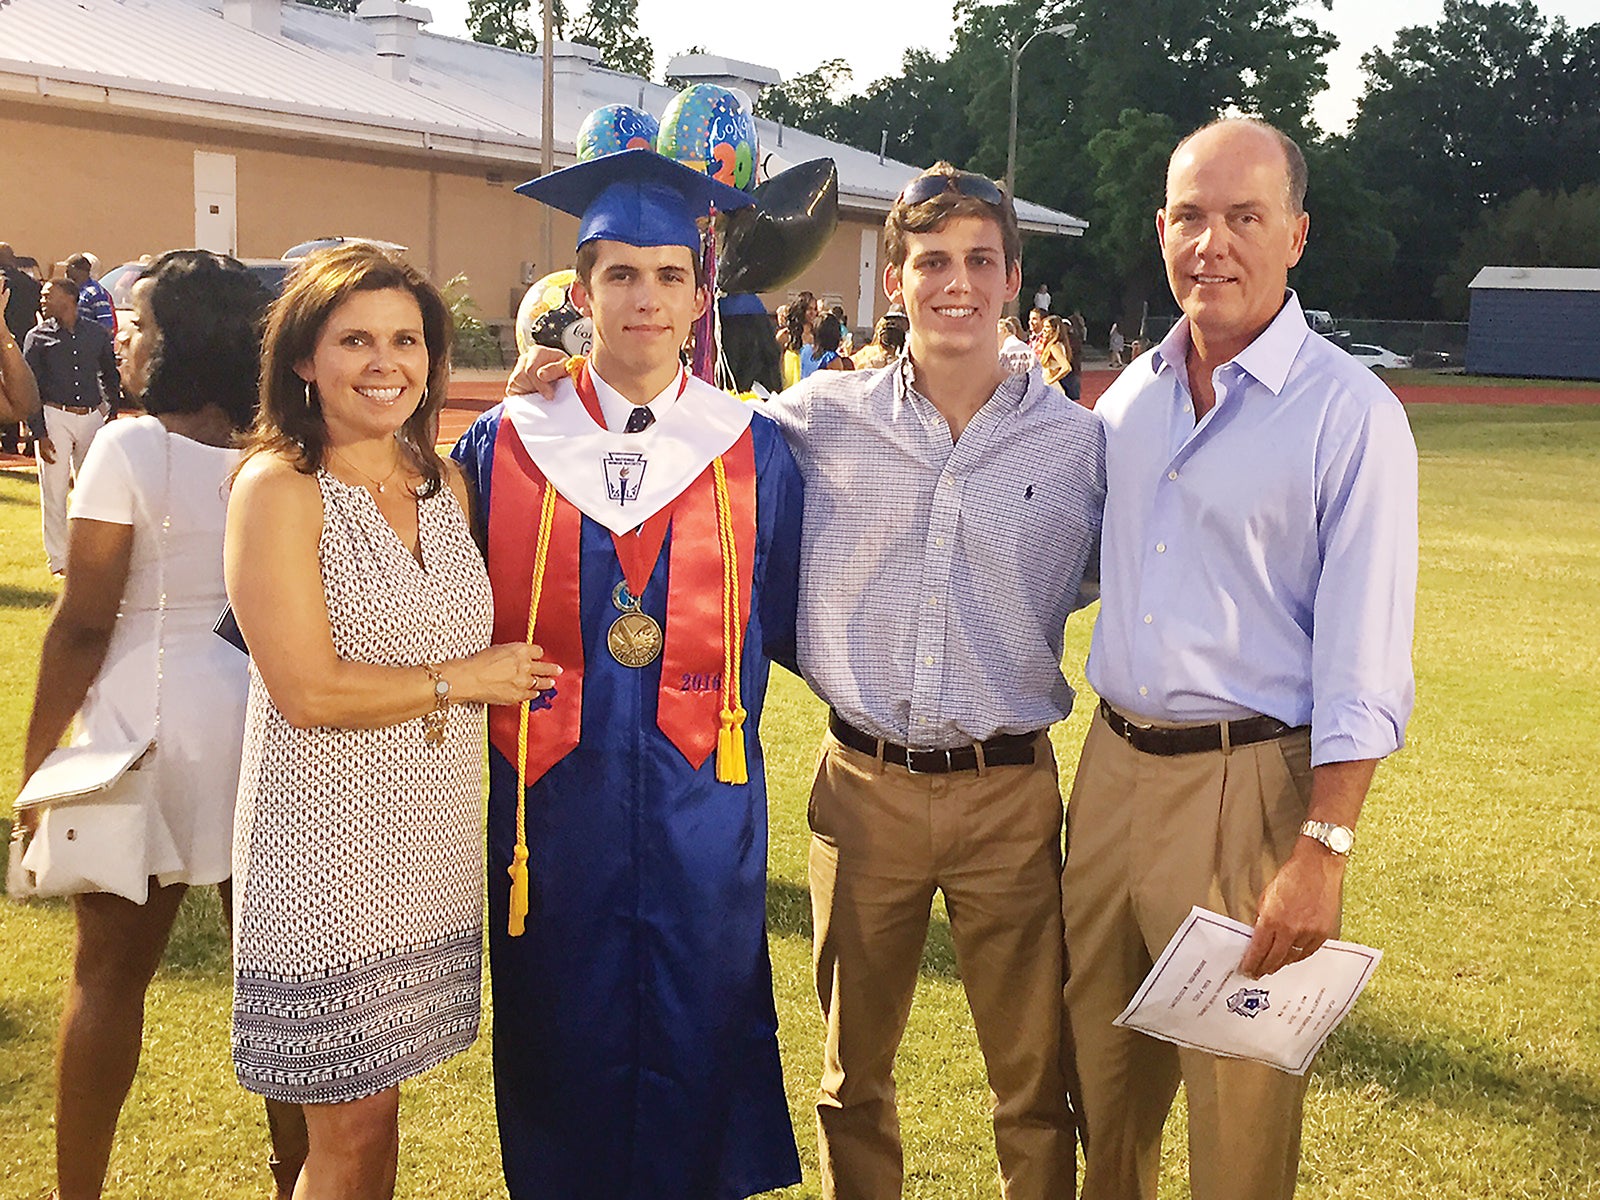 Brookhaven graduate earns $250,000 scholarship - Daily Leader | Daily ...